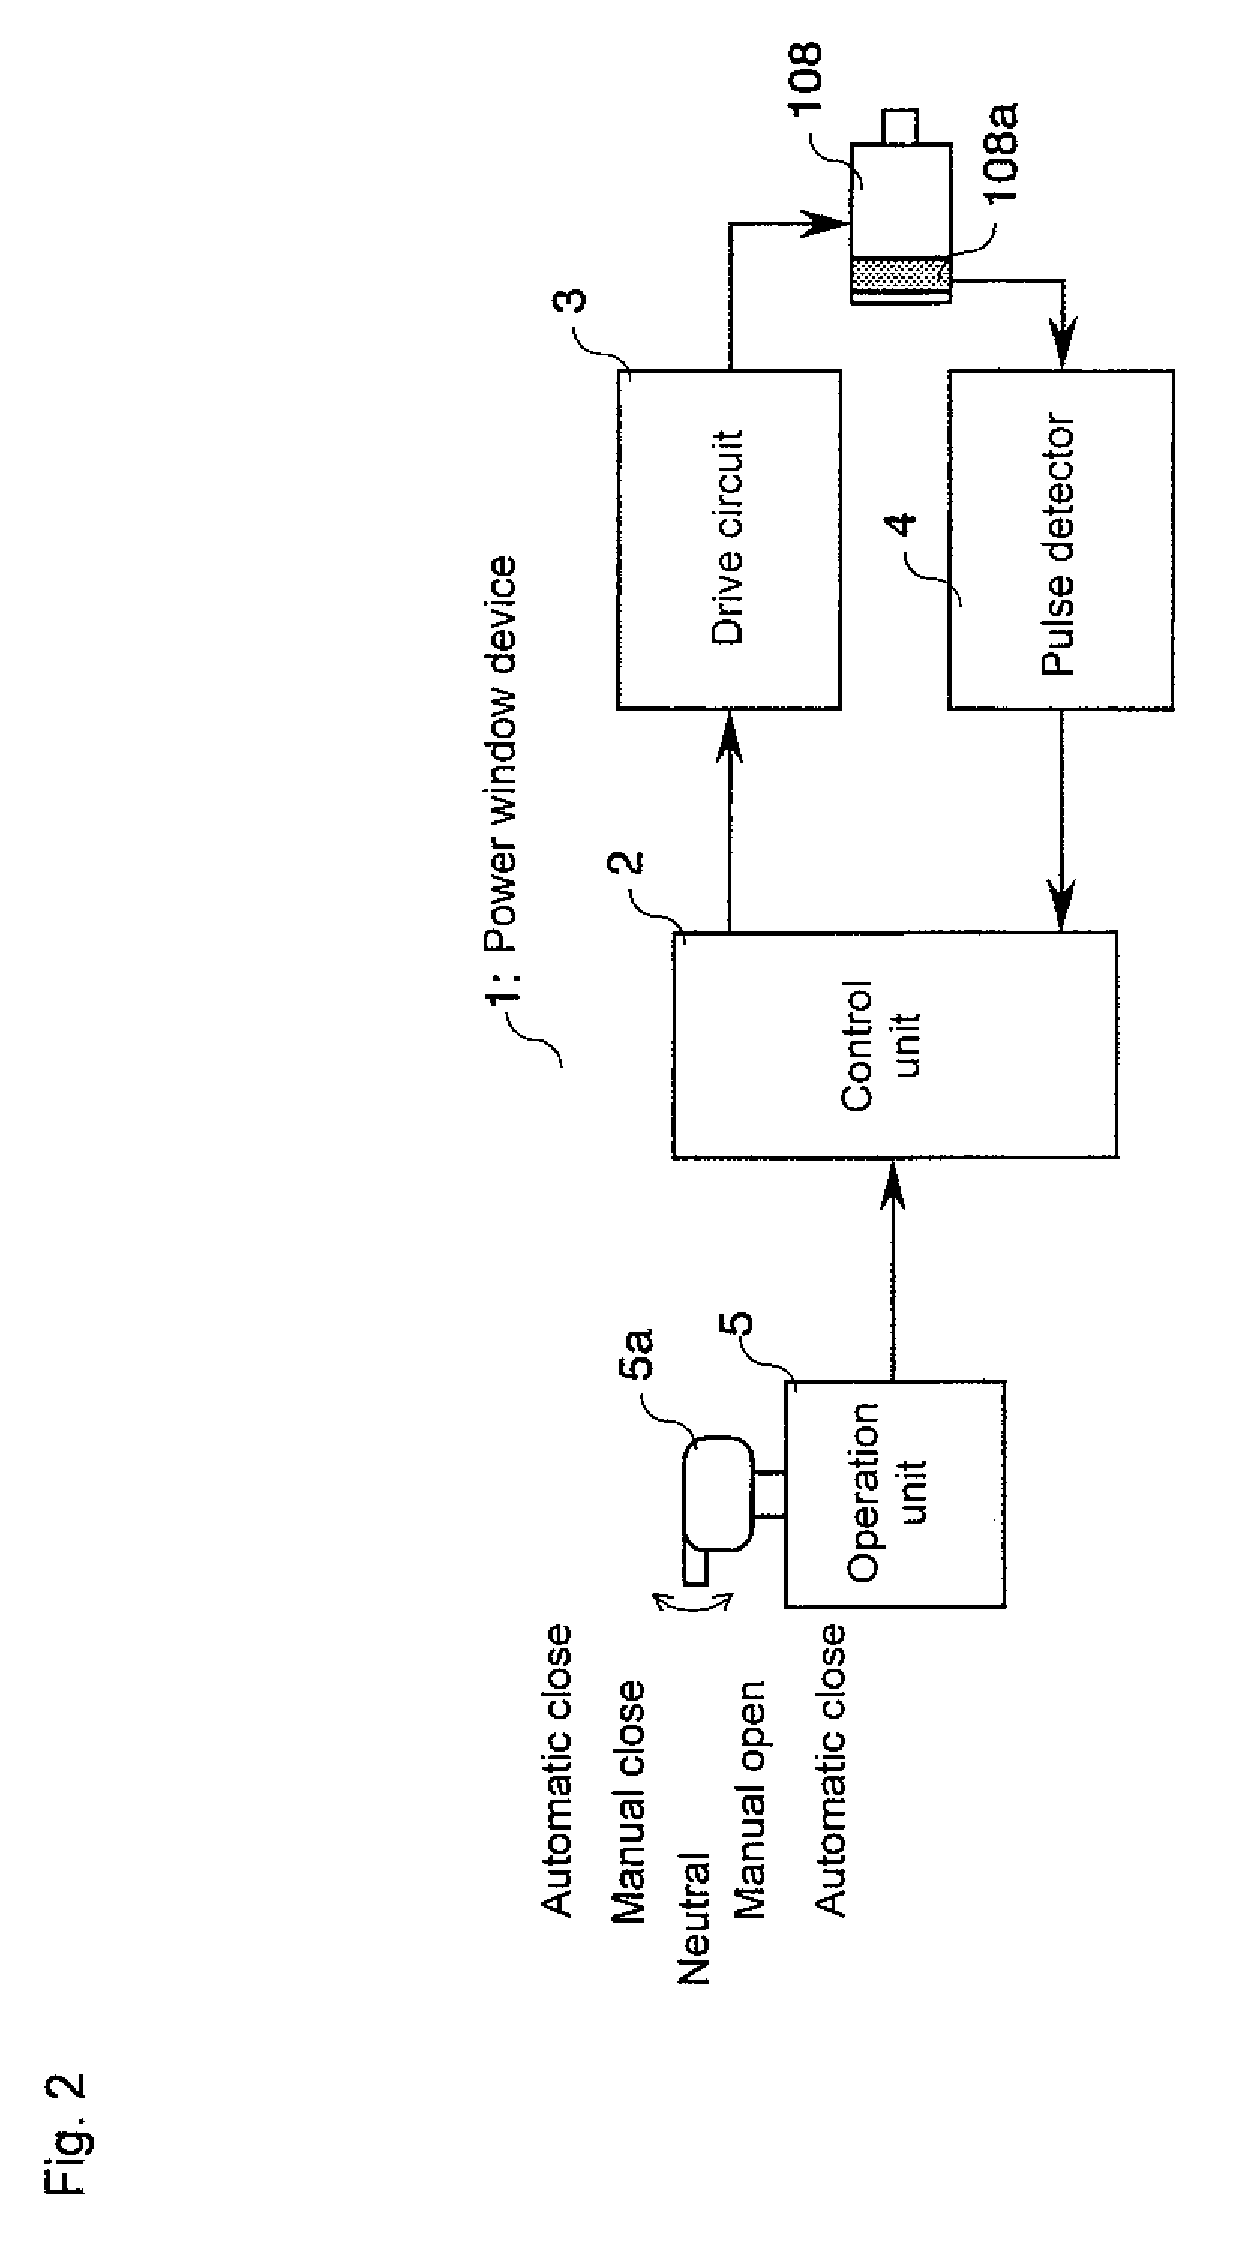 Control device for opening/closing member